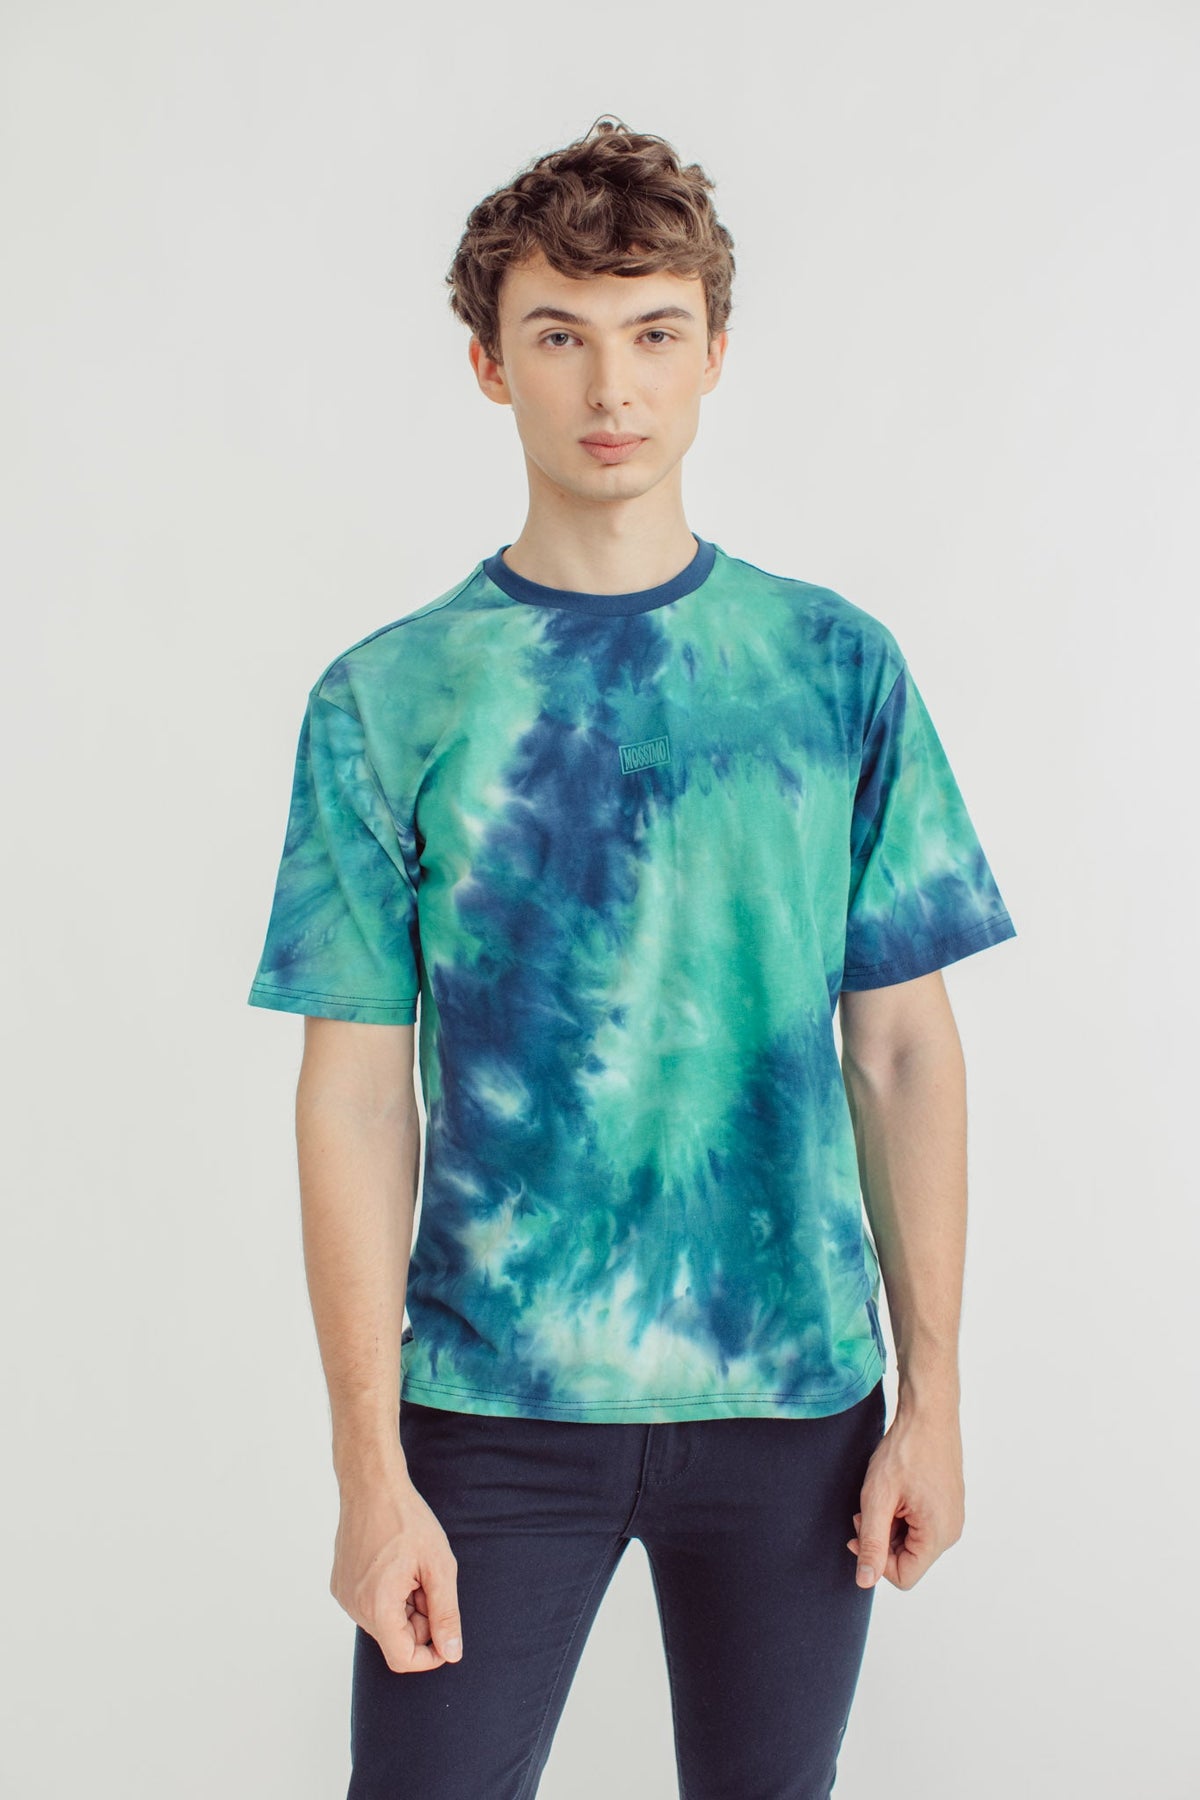 Round Neck Tie Dye with High Density Print Comfort Fit Tee - Mossimo PH